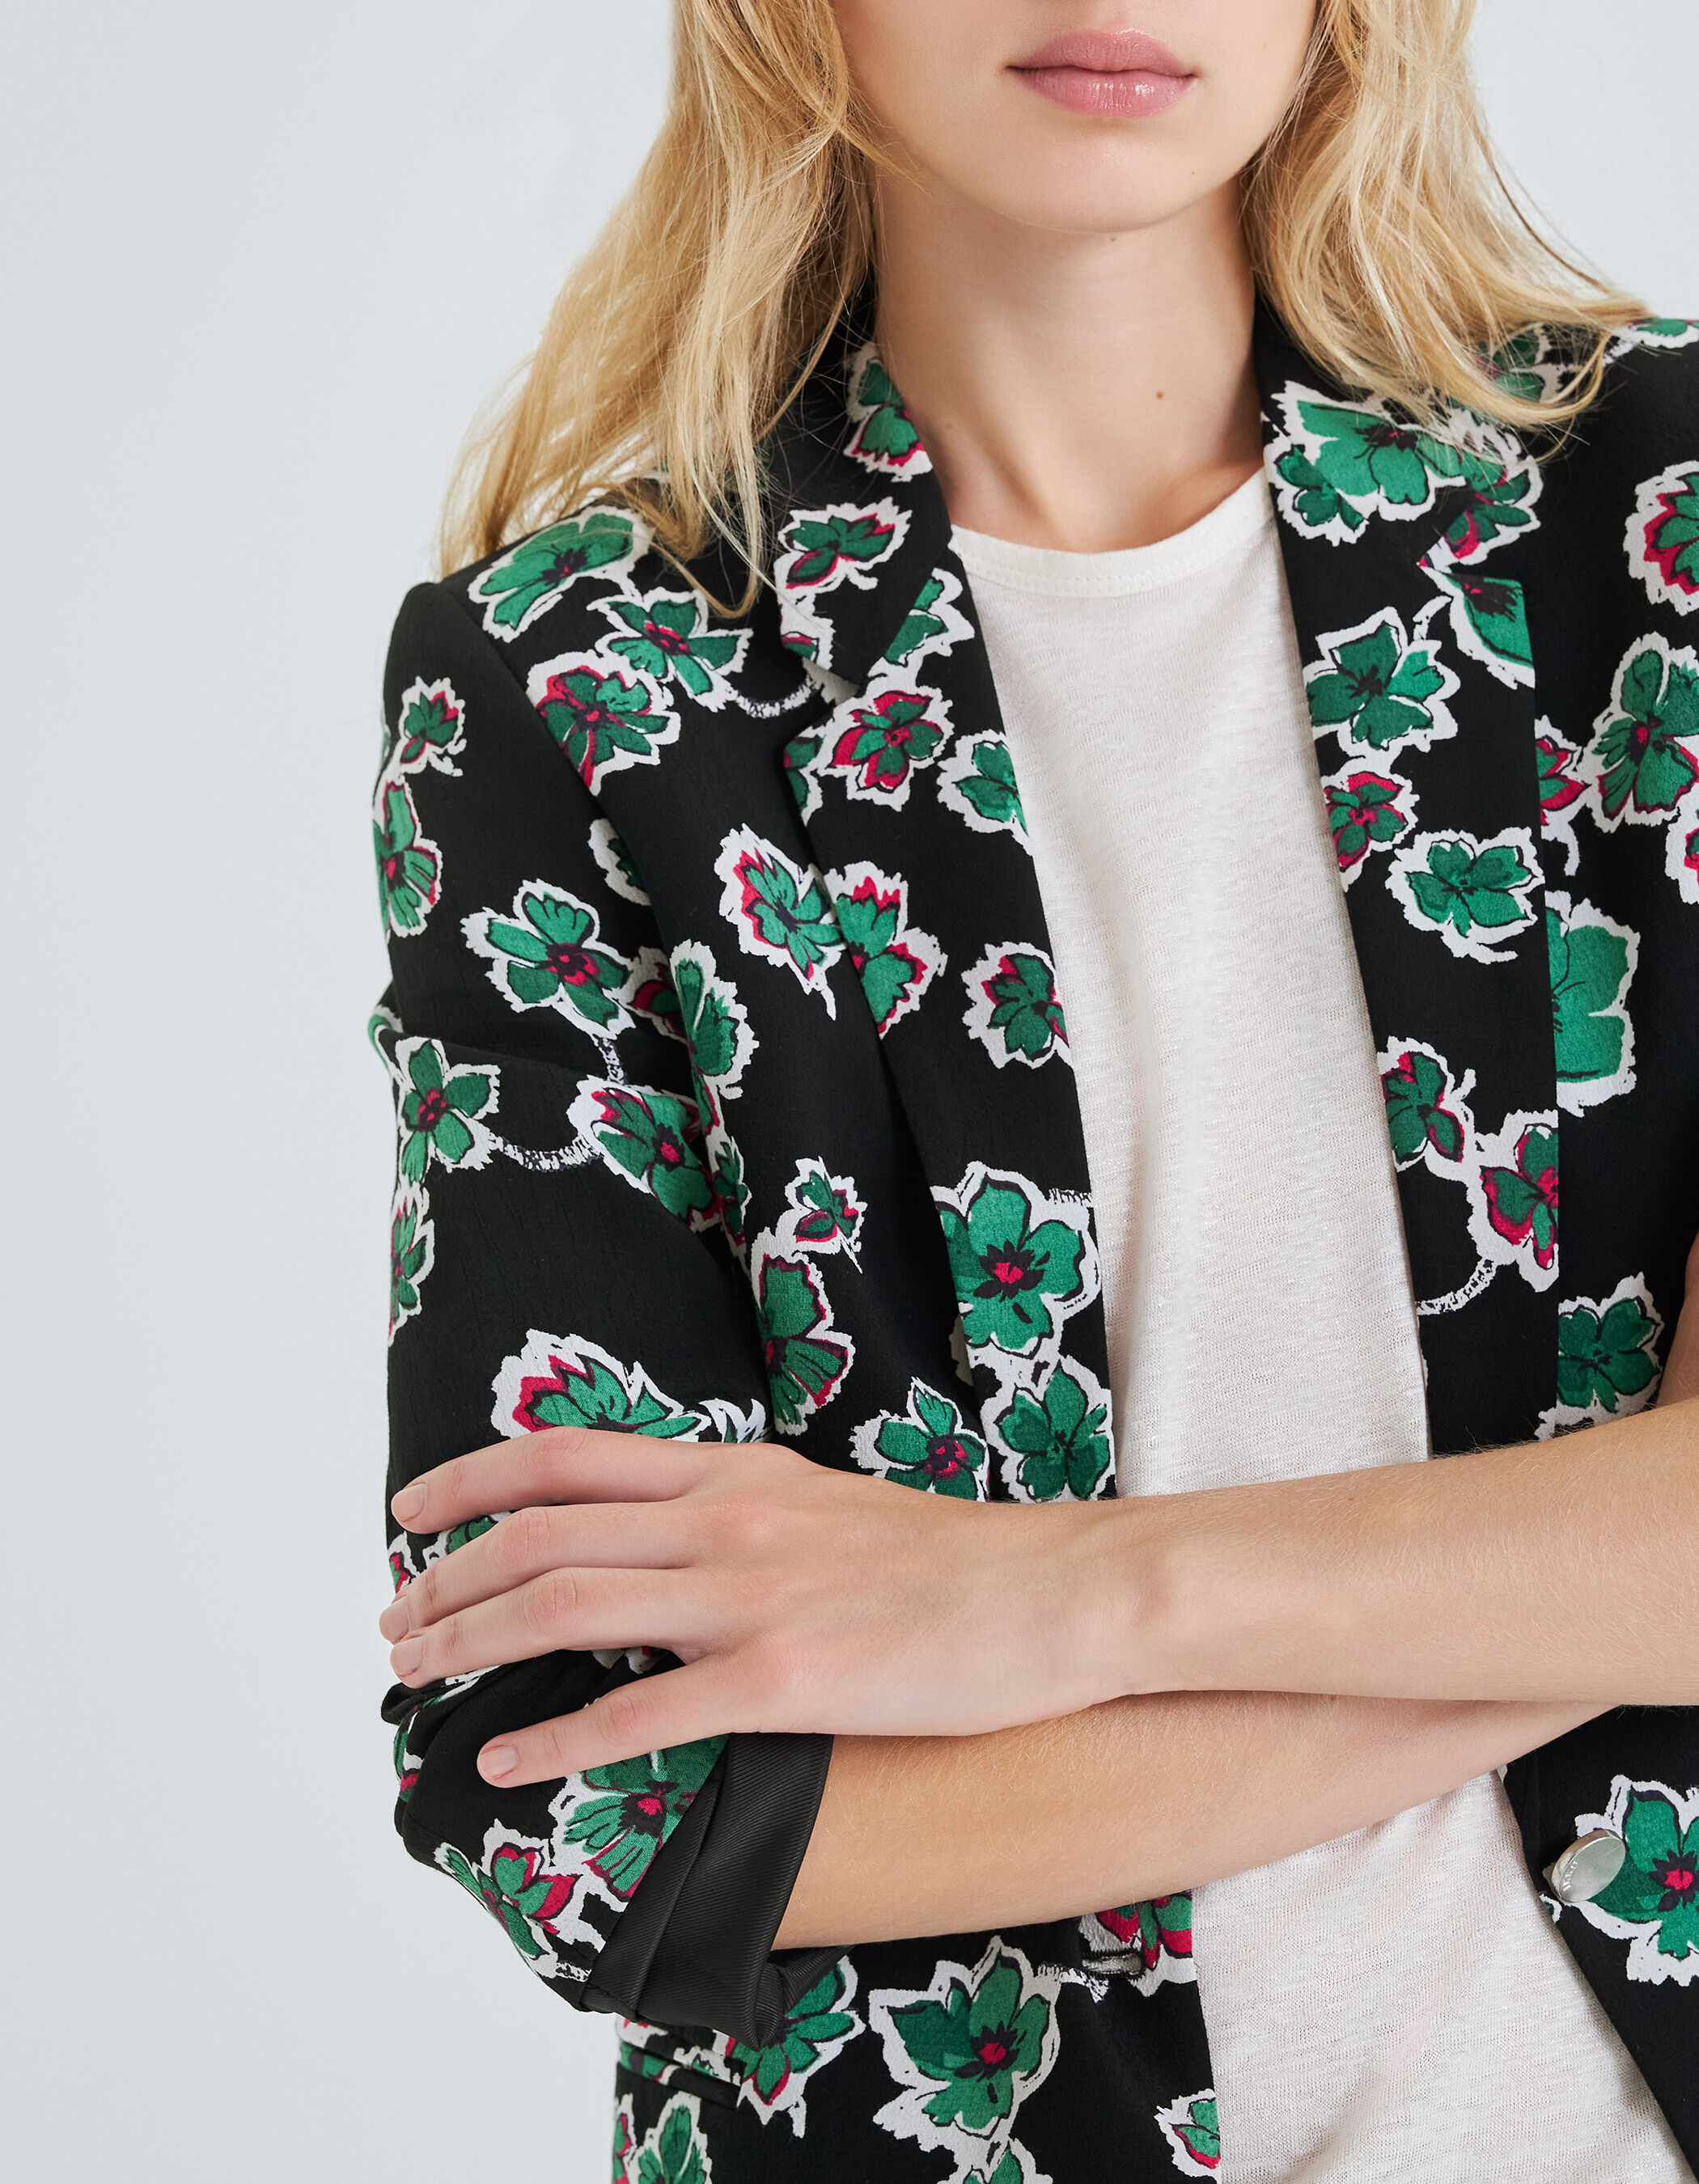 Women's black suit jacket with green flowers print